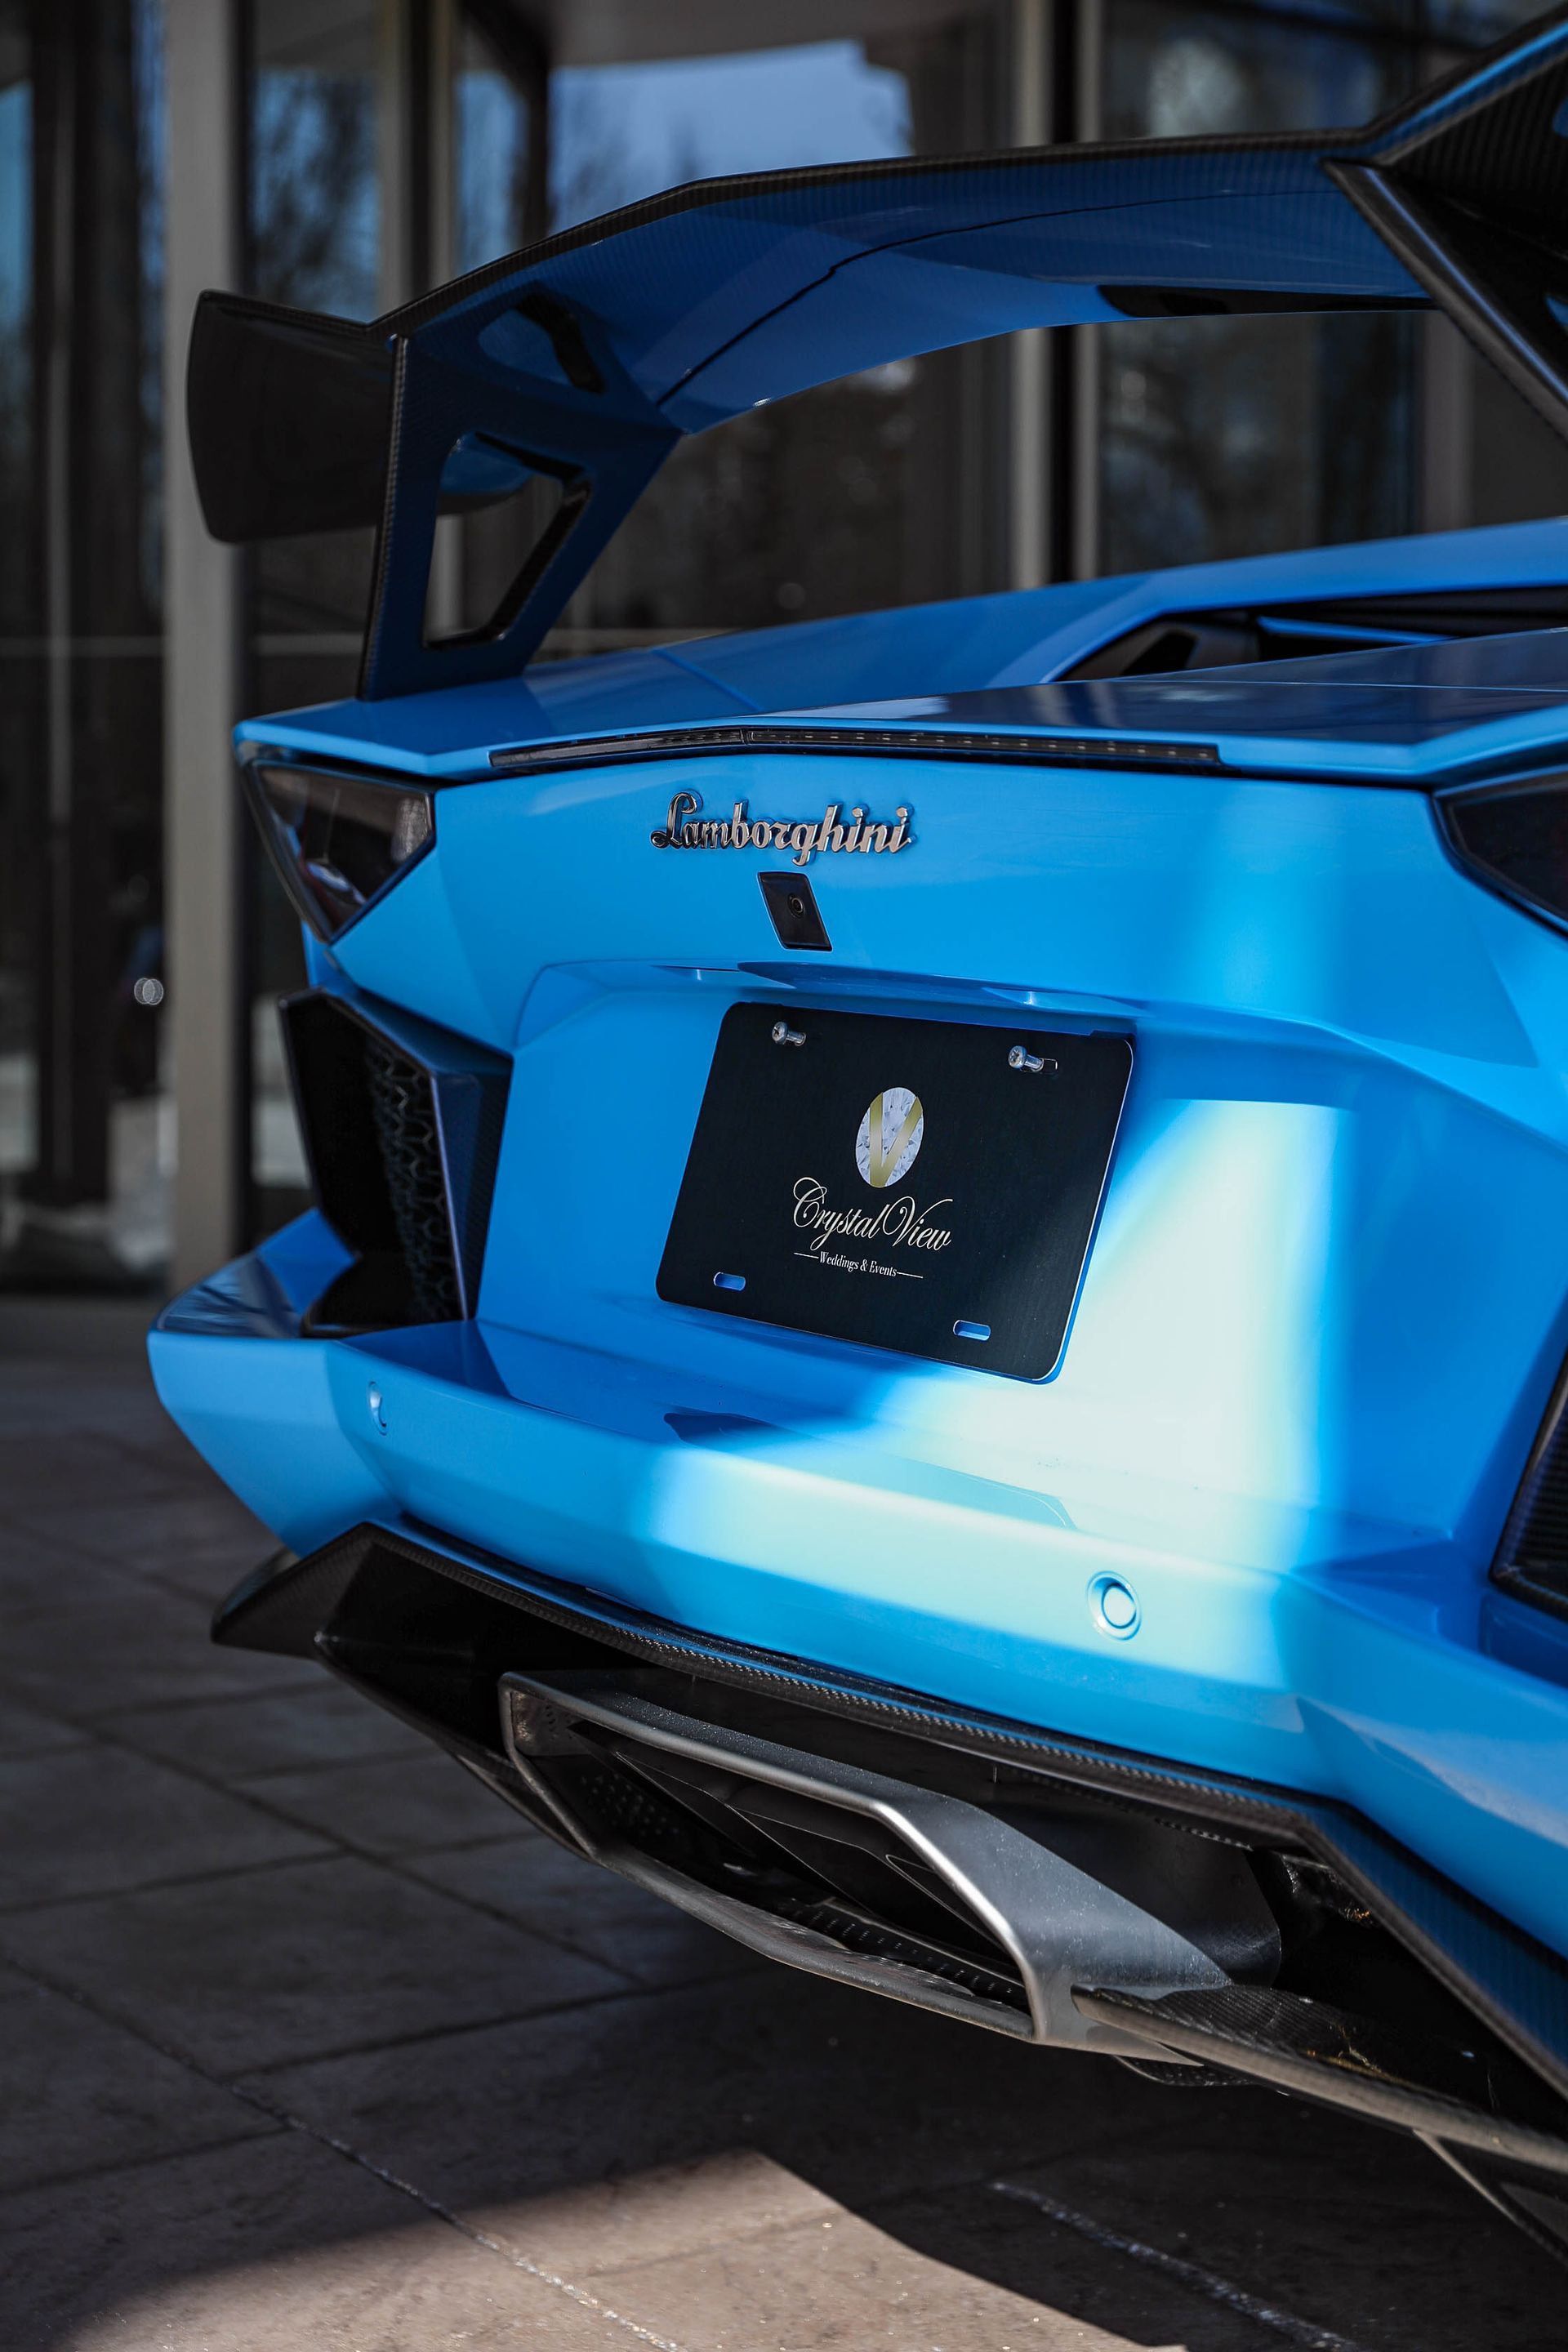 back tail lights of luxury car Lamborghini Aventador available for photo opportunities